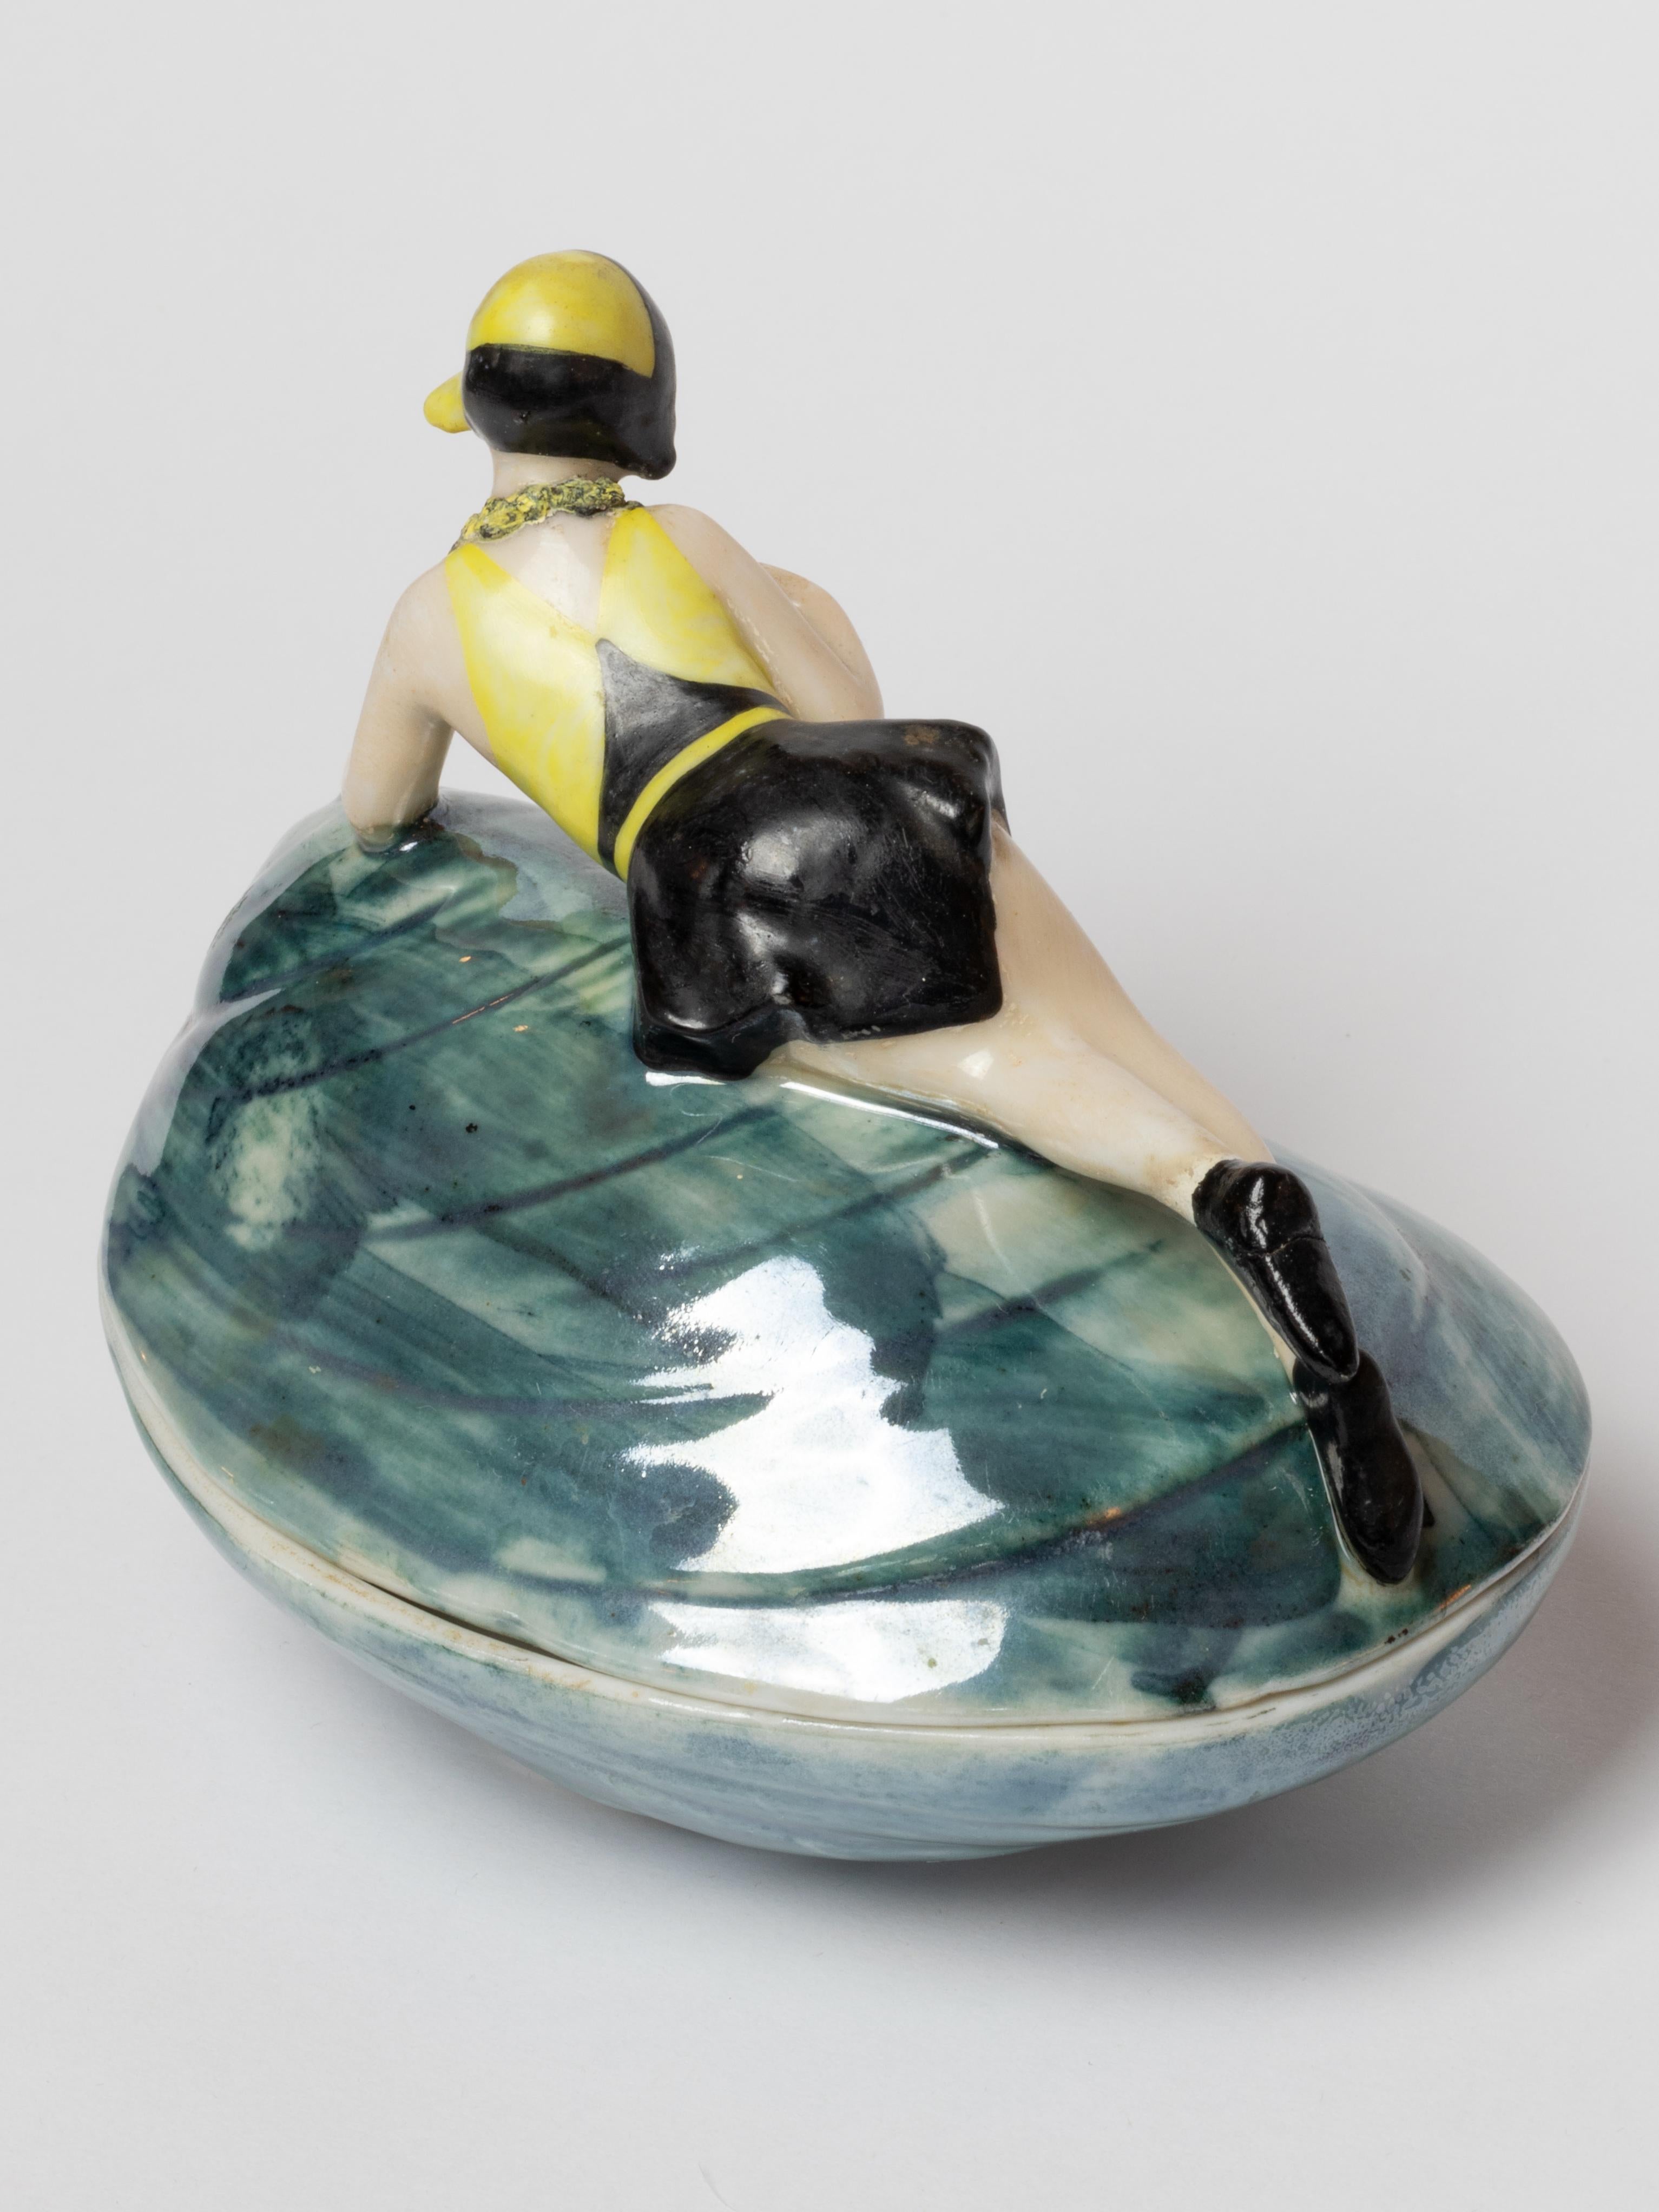 Art Deco Mussel Shell Rice Powder Box Pin Up Woman Porcelain by Goebel, 1929 For Sale 1